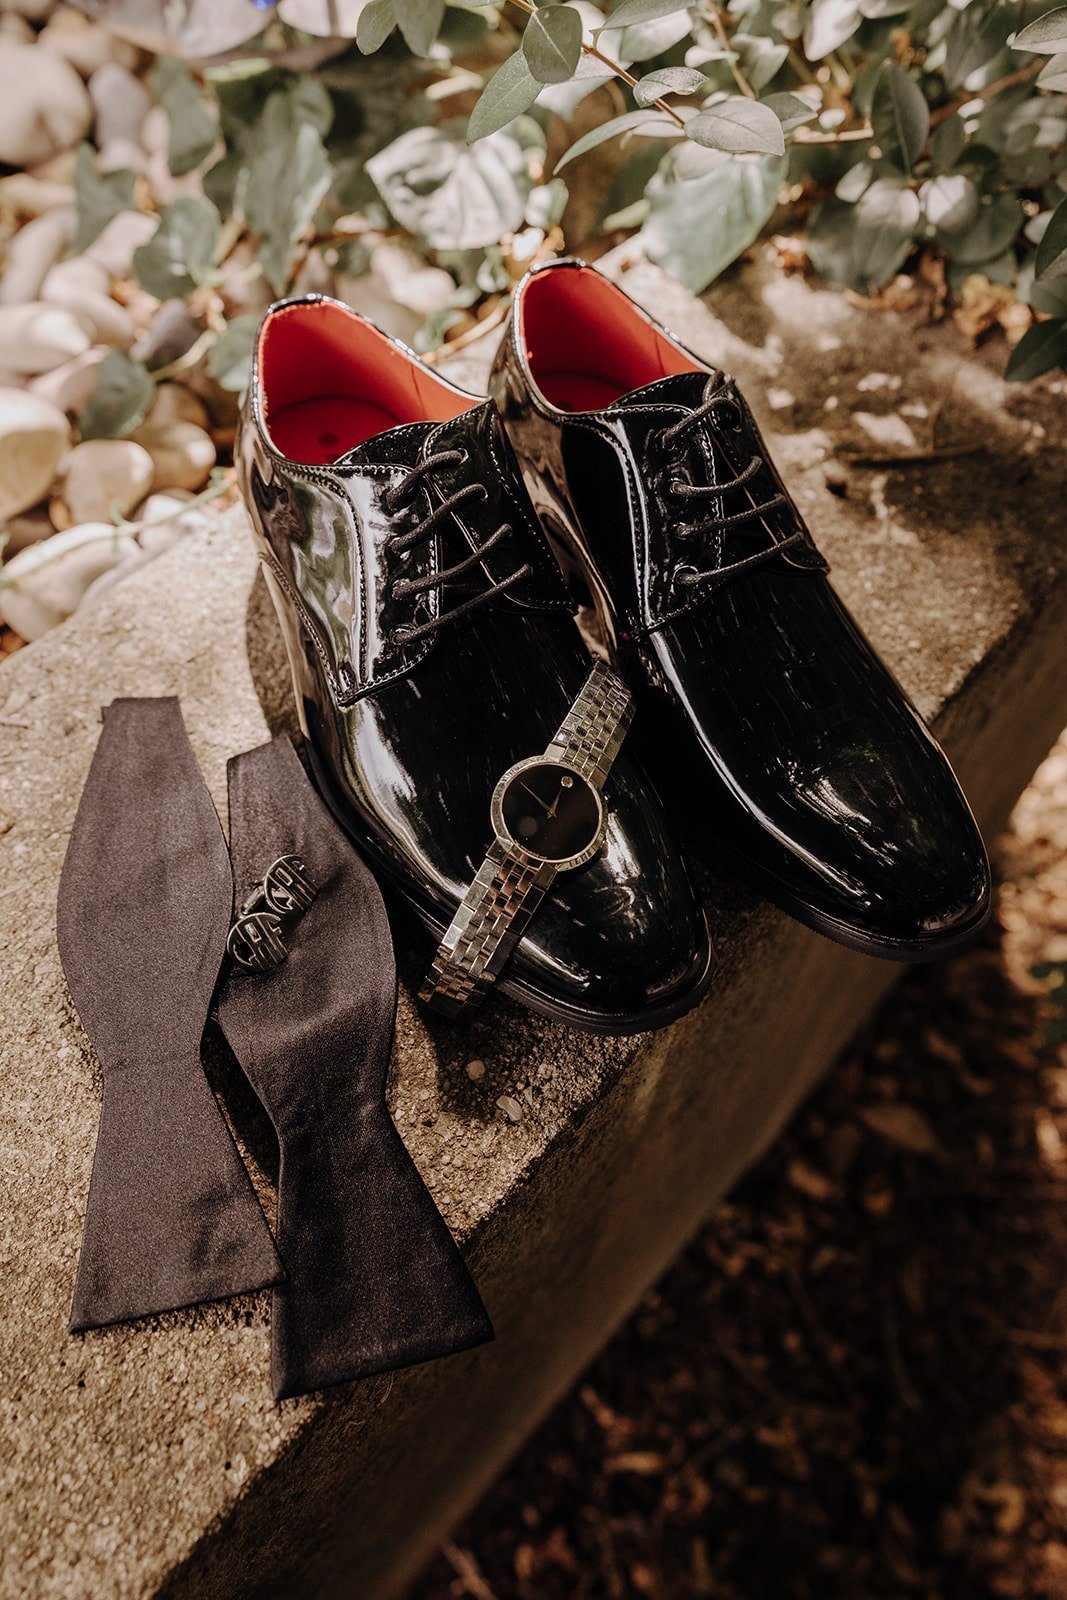 Black patent leather dress shoes and details